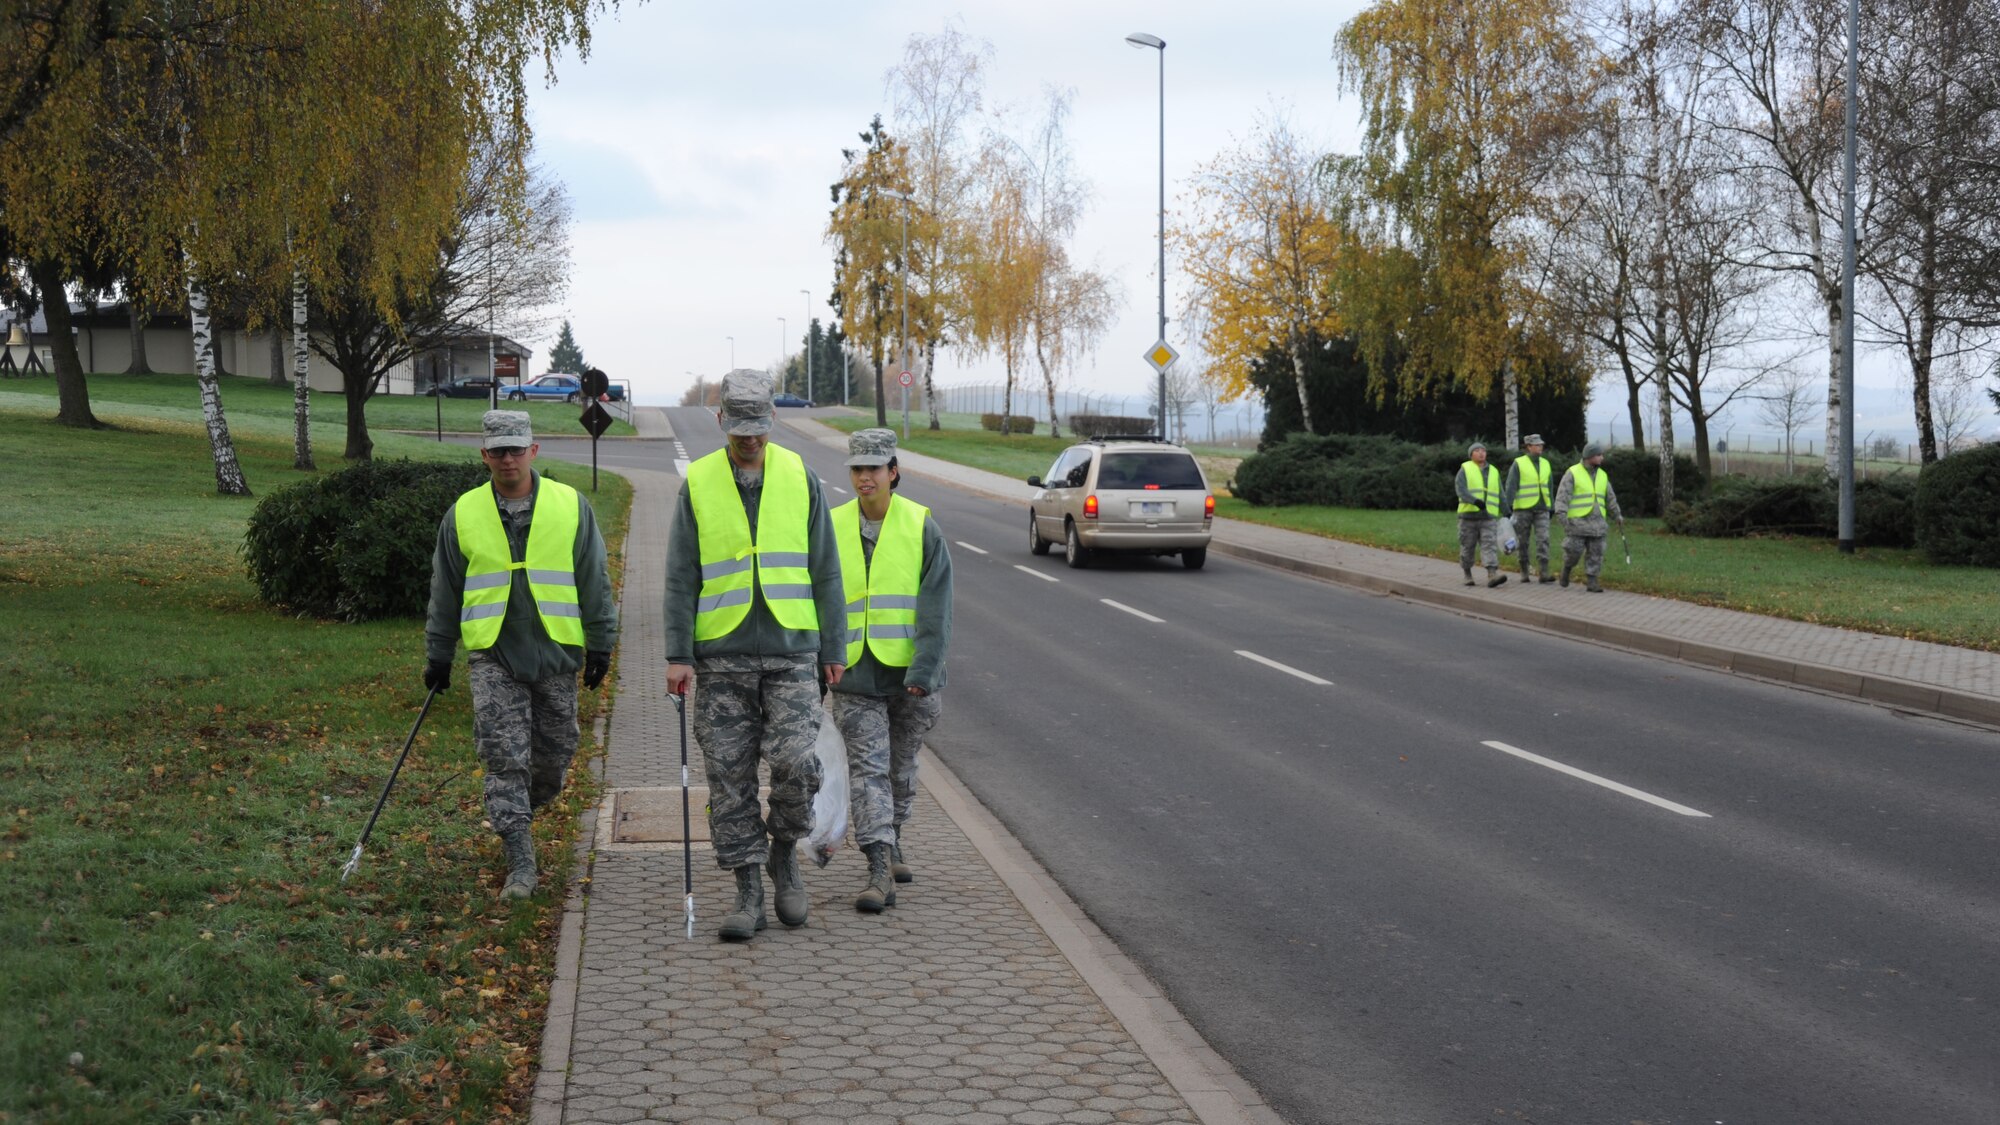 SPANGDAHLEM AIR BASE, Germany -- Eifel Pride Airmen walk their morning route along Arnold Boulevard Nov. 25, 2013. Airmen in Eifel Pride learn to take pride in their base during the two weeks in the program. (U.S. Air Force photo by Airman 1st Class Dylan Nuckolls/Released)